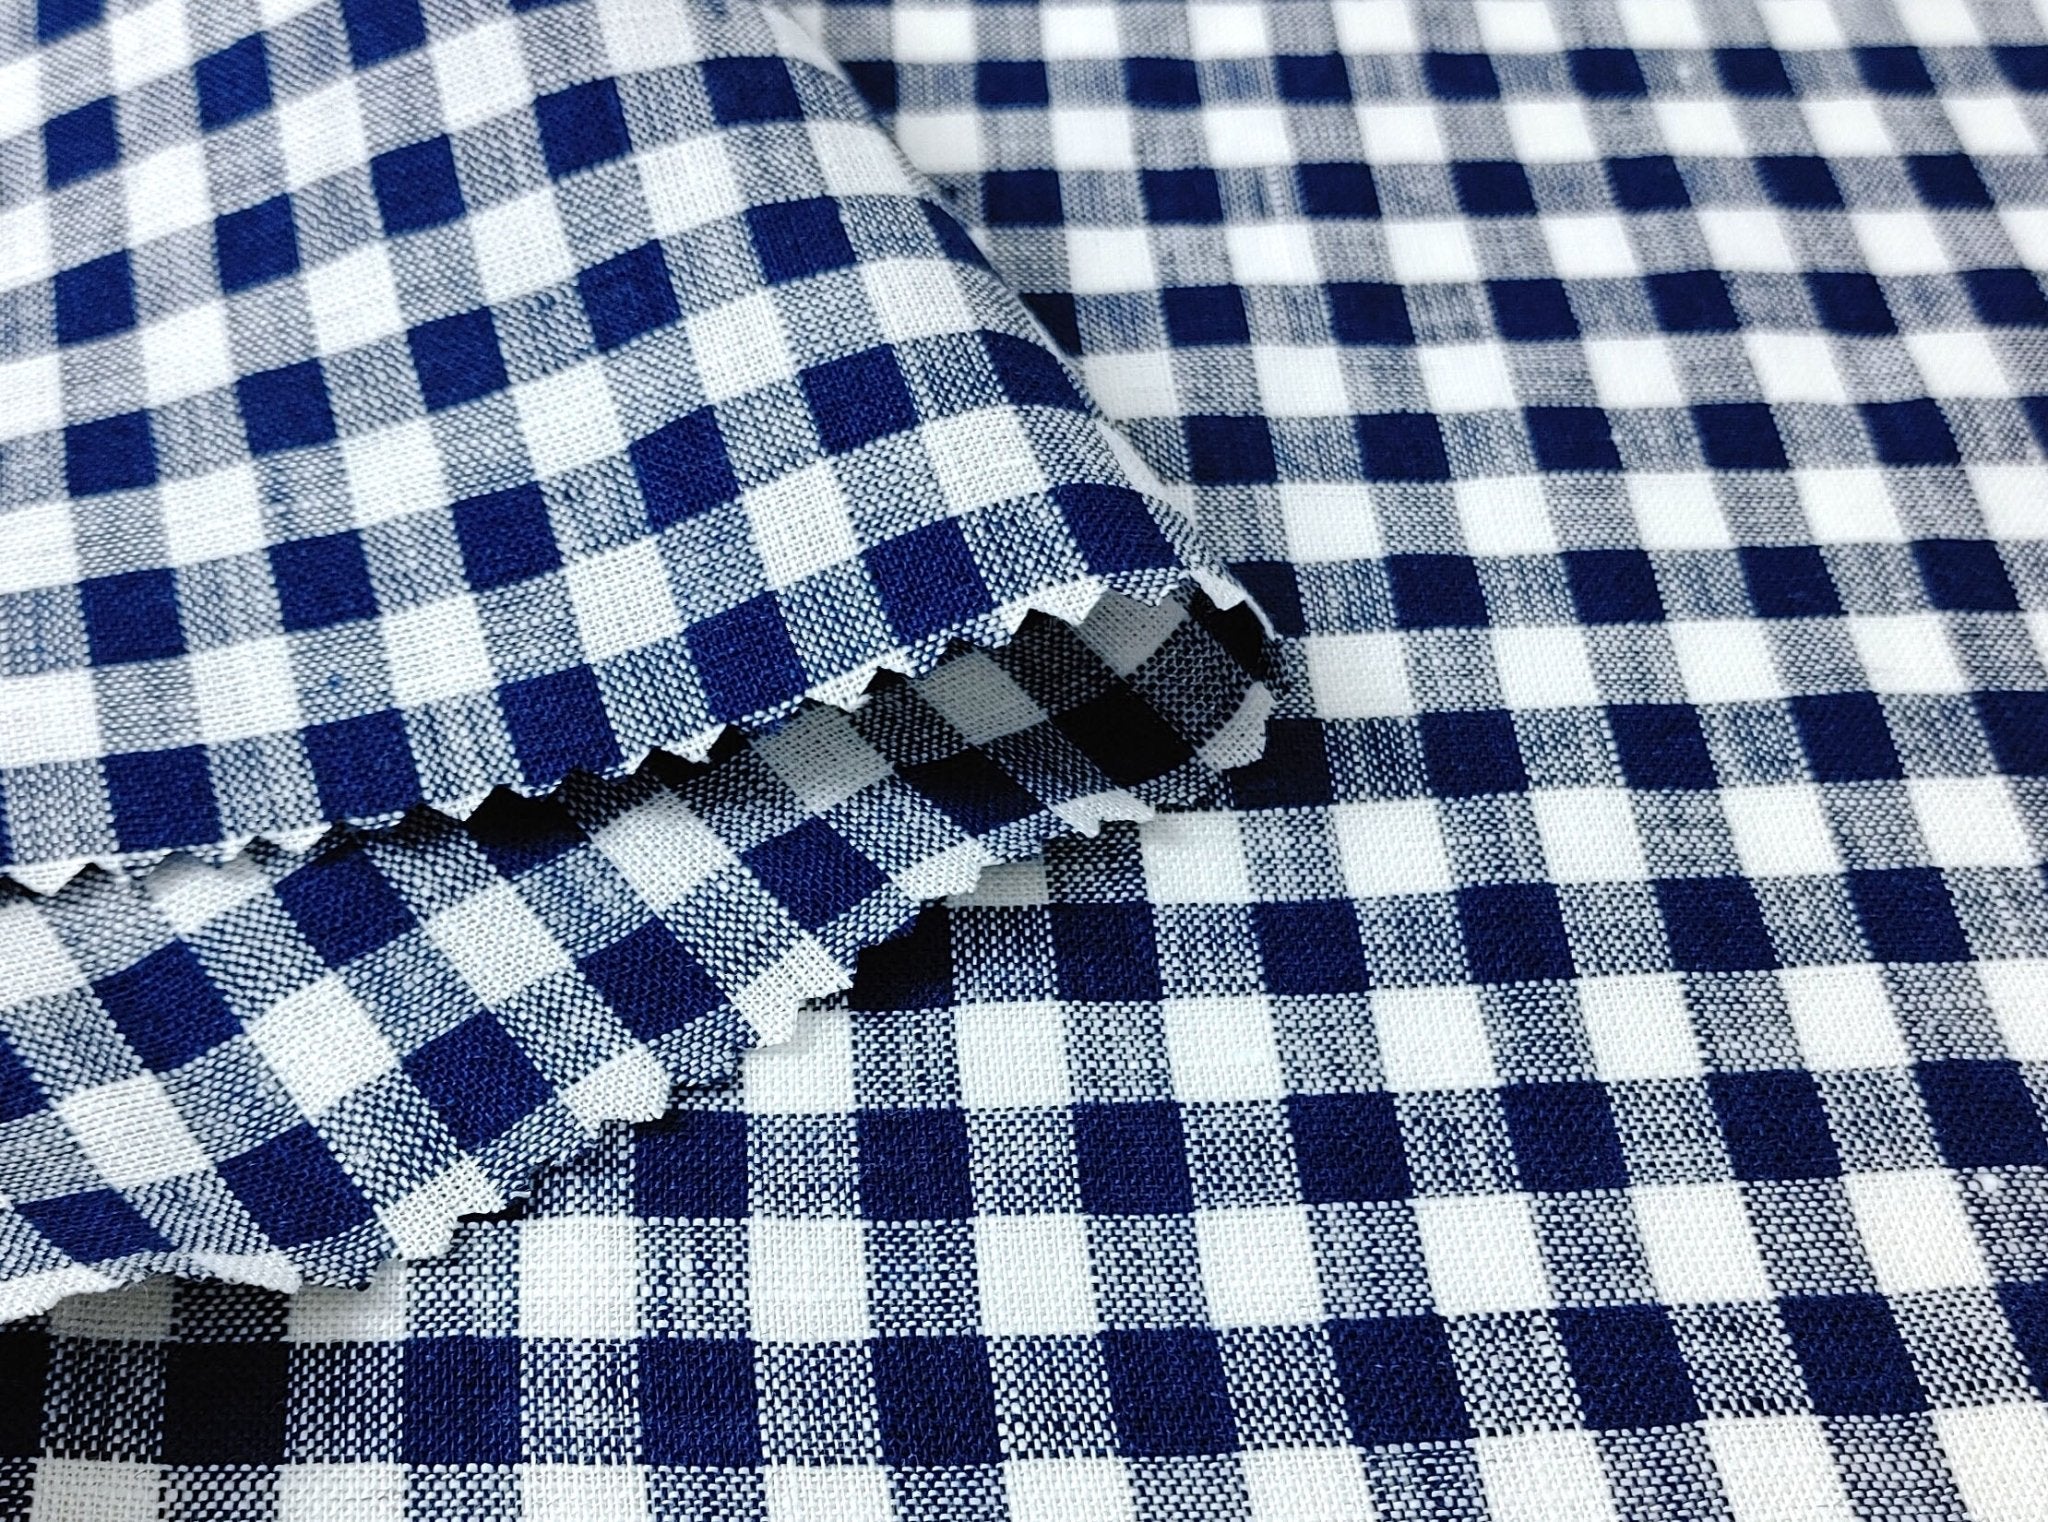 100% Linen Navy Small Gingham Check - Light and Airy 4684 - The Linen Lab - Navy